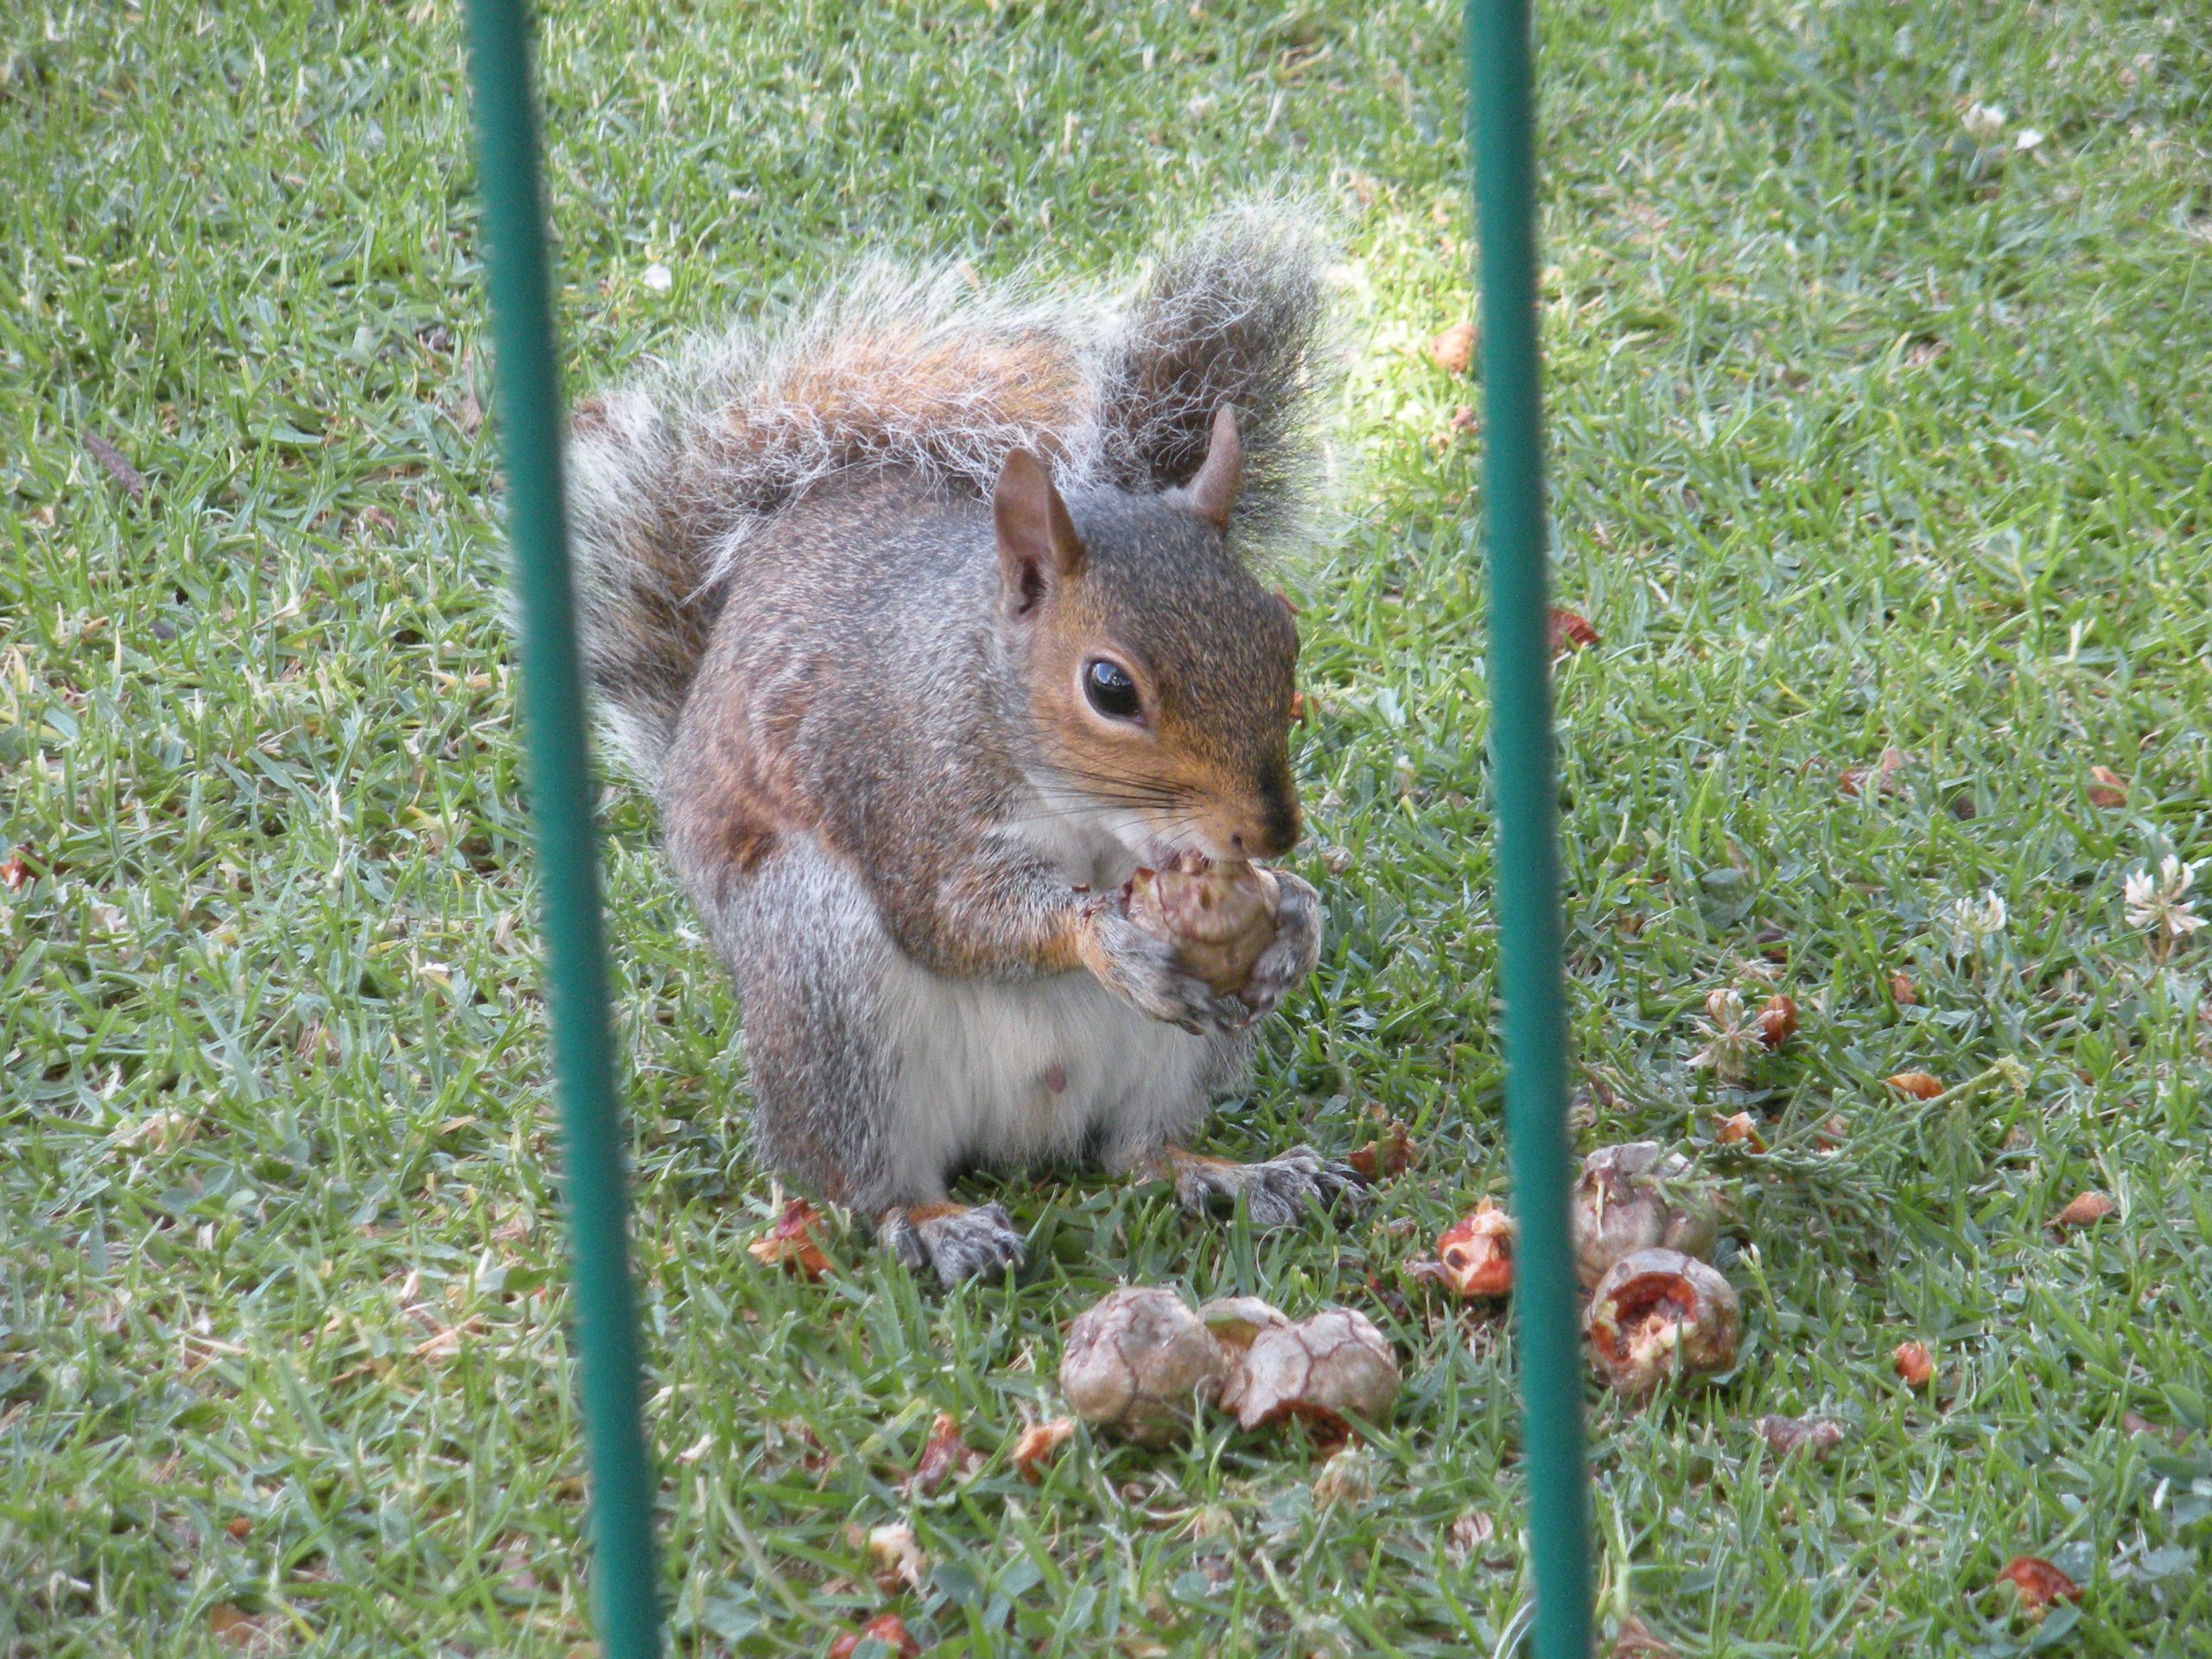 https://www.walterreeves.com/wp-content/uploads/2010/07/squirrel-3-2-scaled.jpg